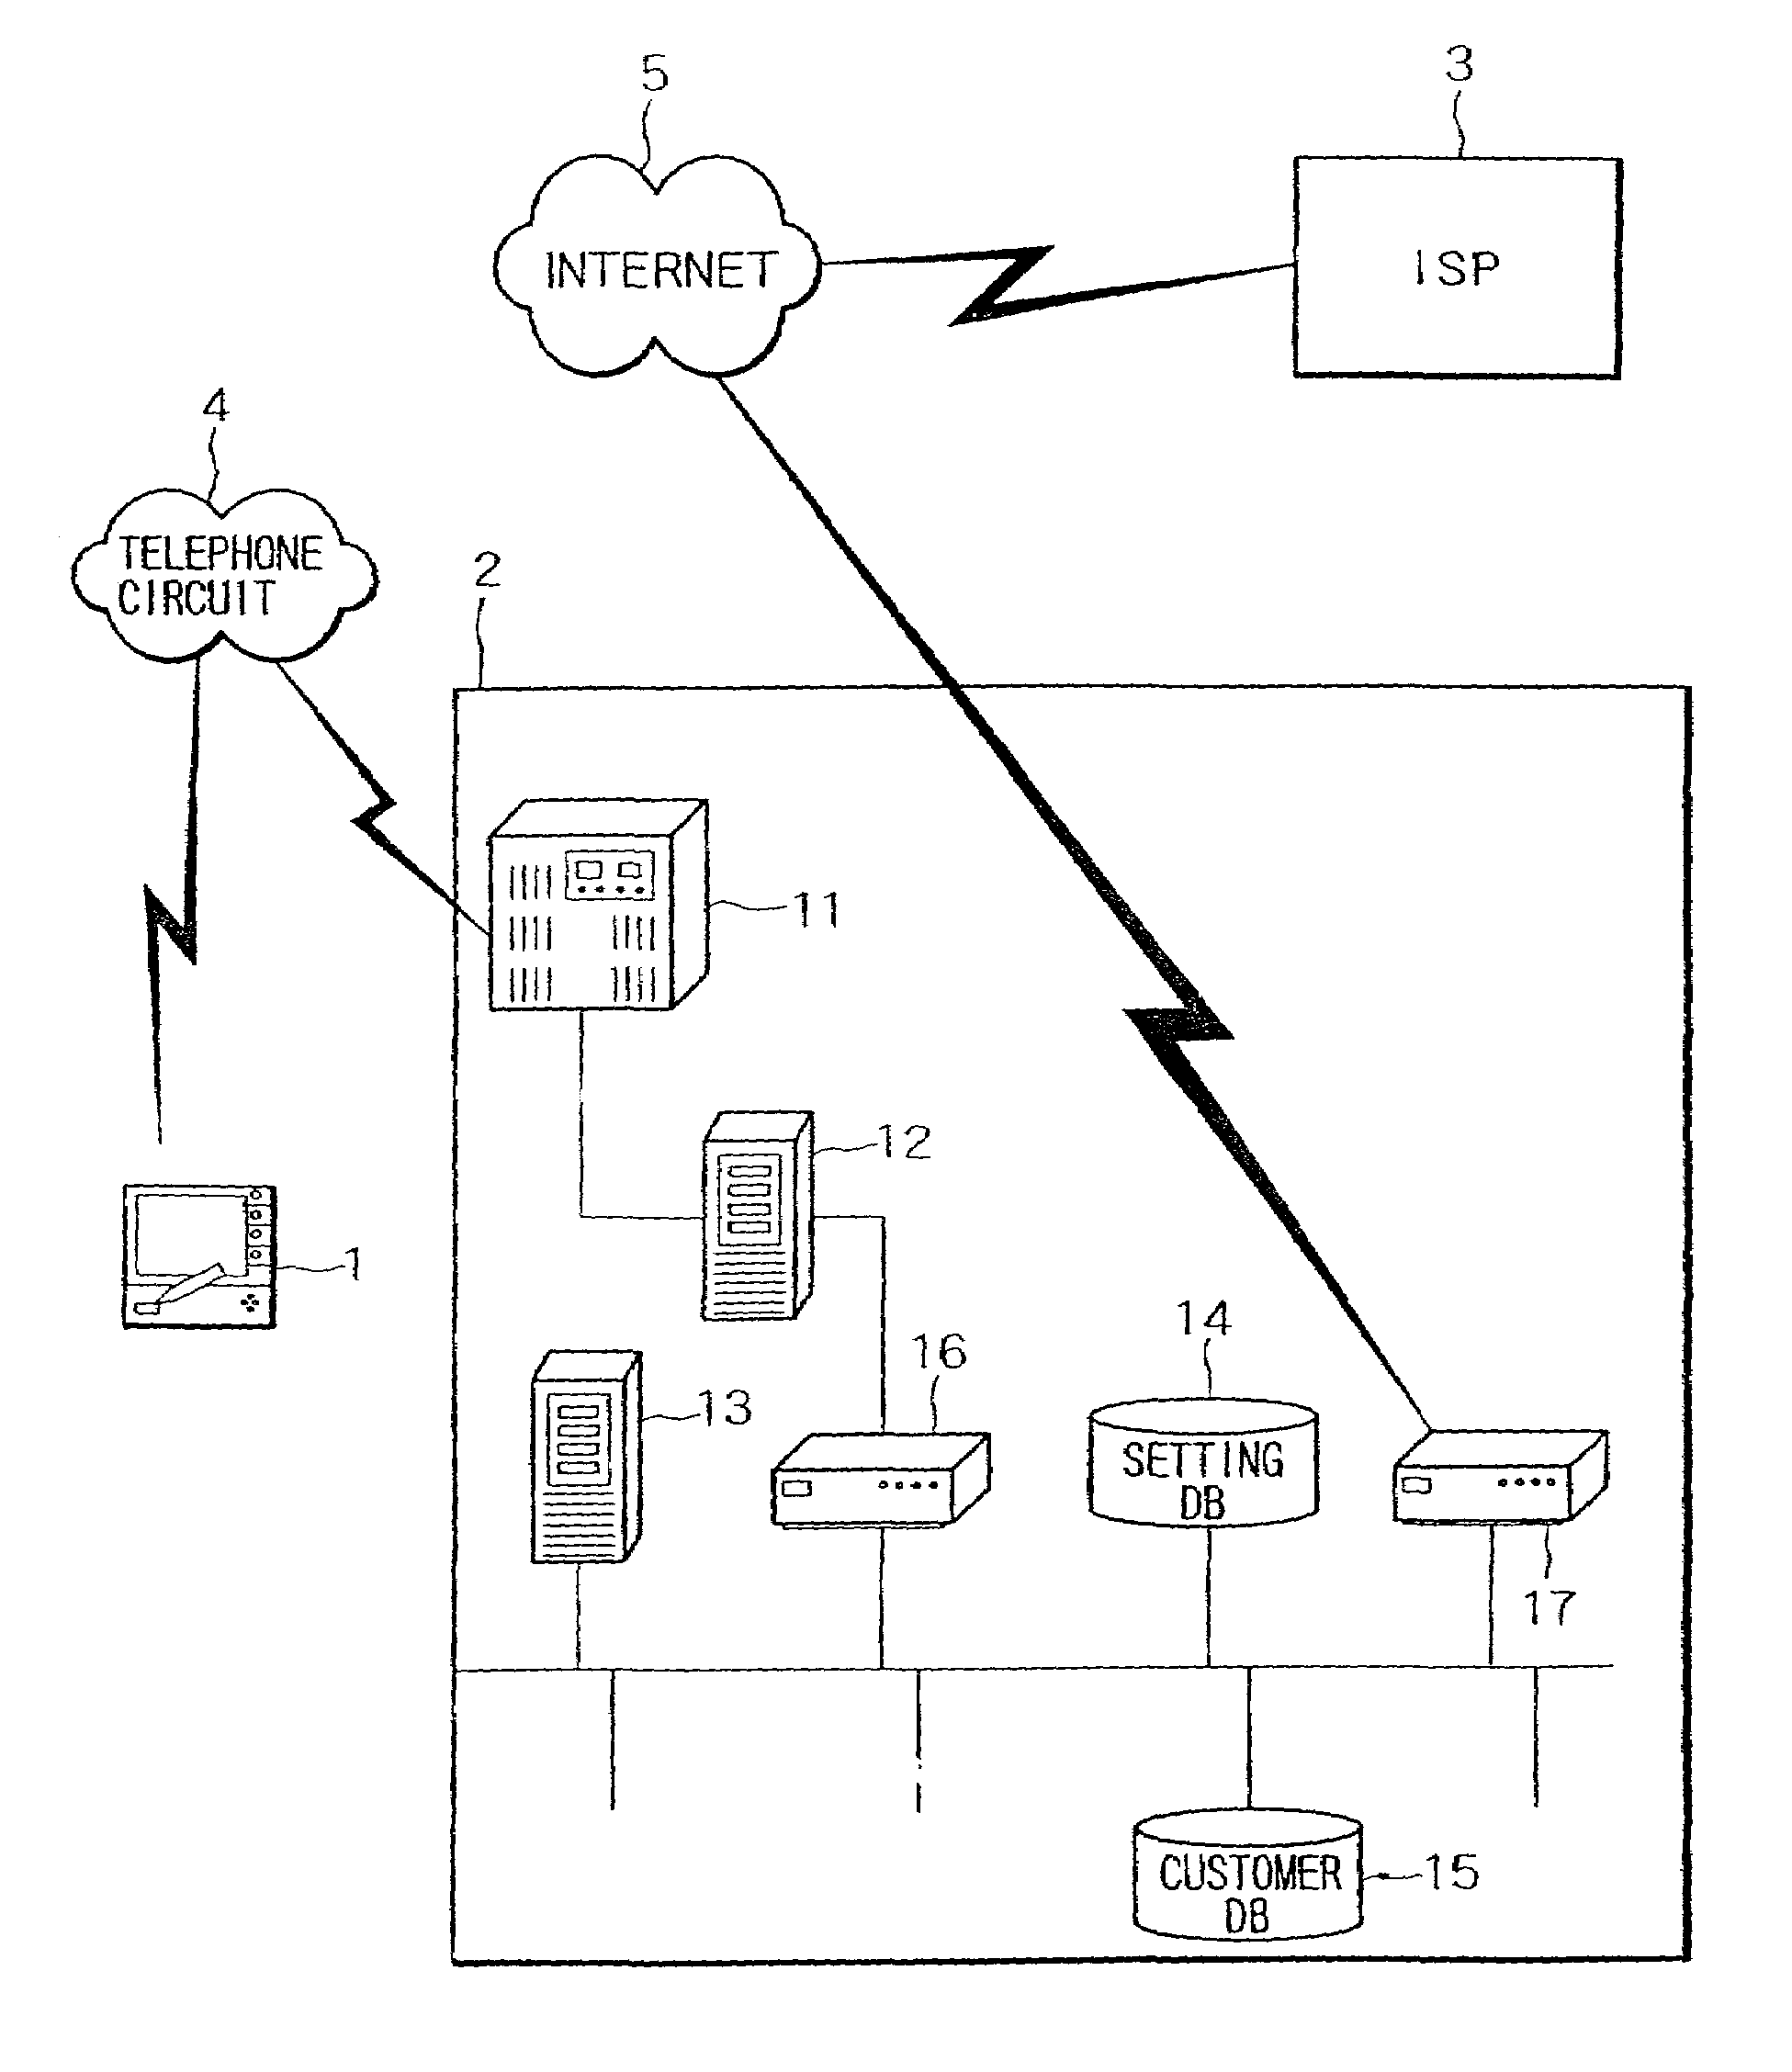 Method for registering a terminal with an internet service provider